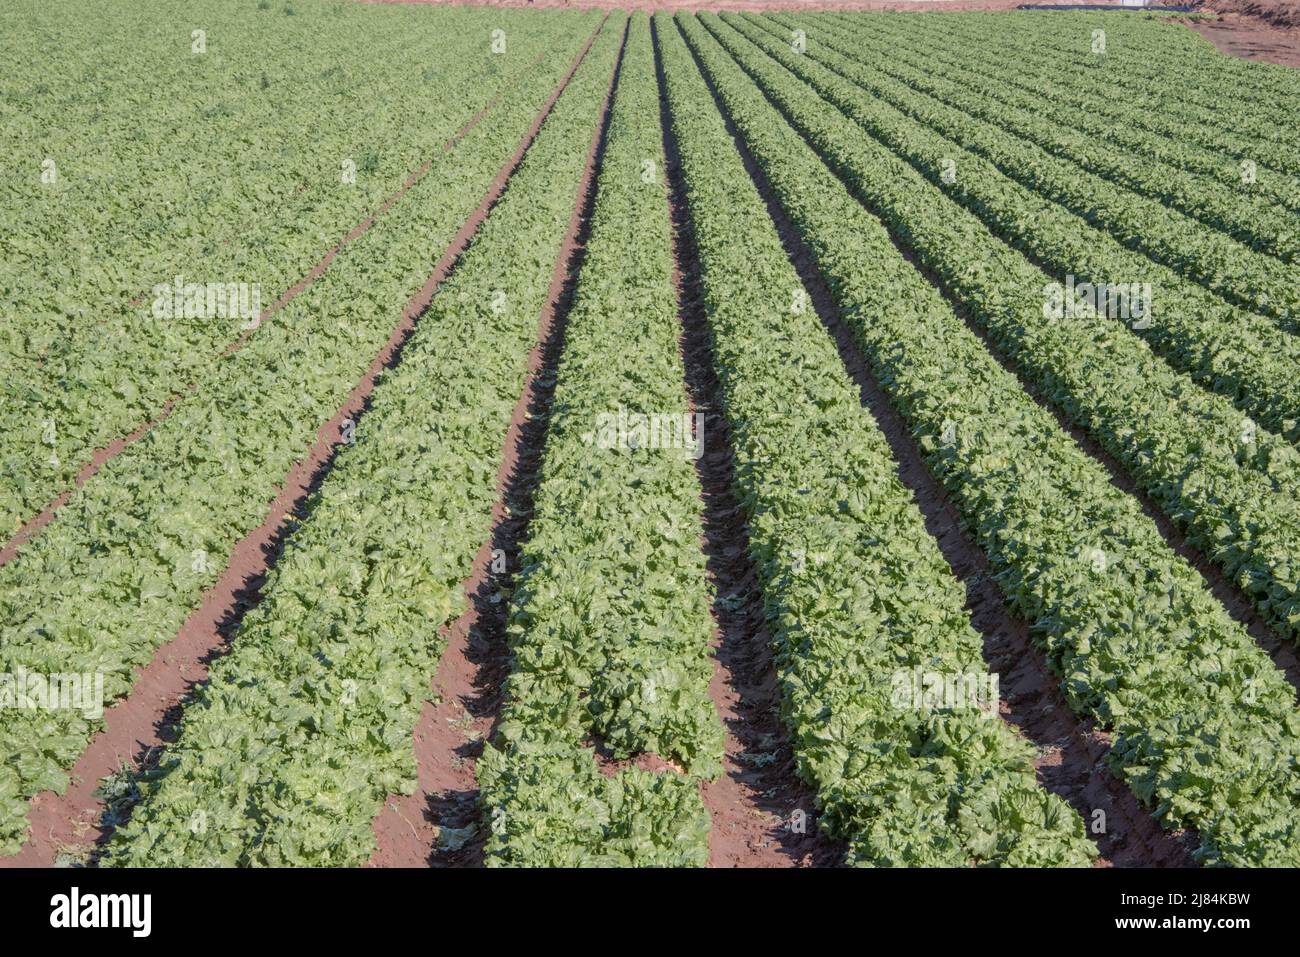 Truck crops of vegetables, grow in straight rows so they can be flood irrigated. Arid west. Yuma, Arizona Stock Photo